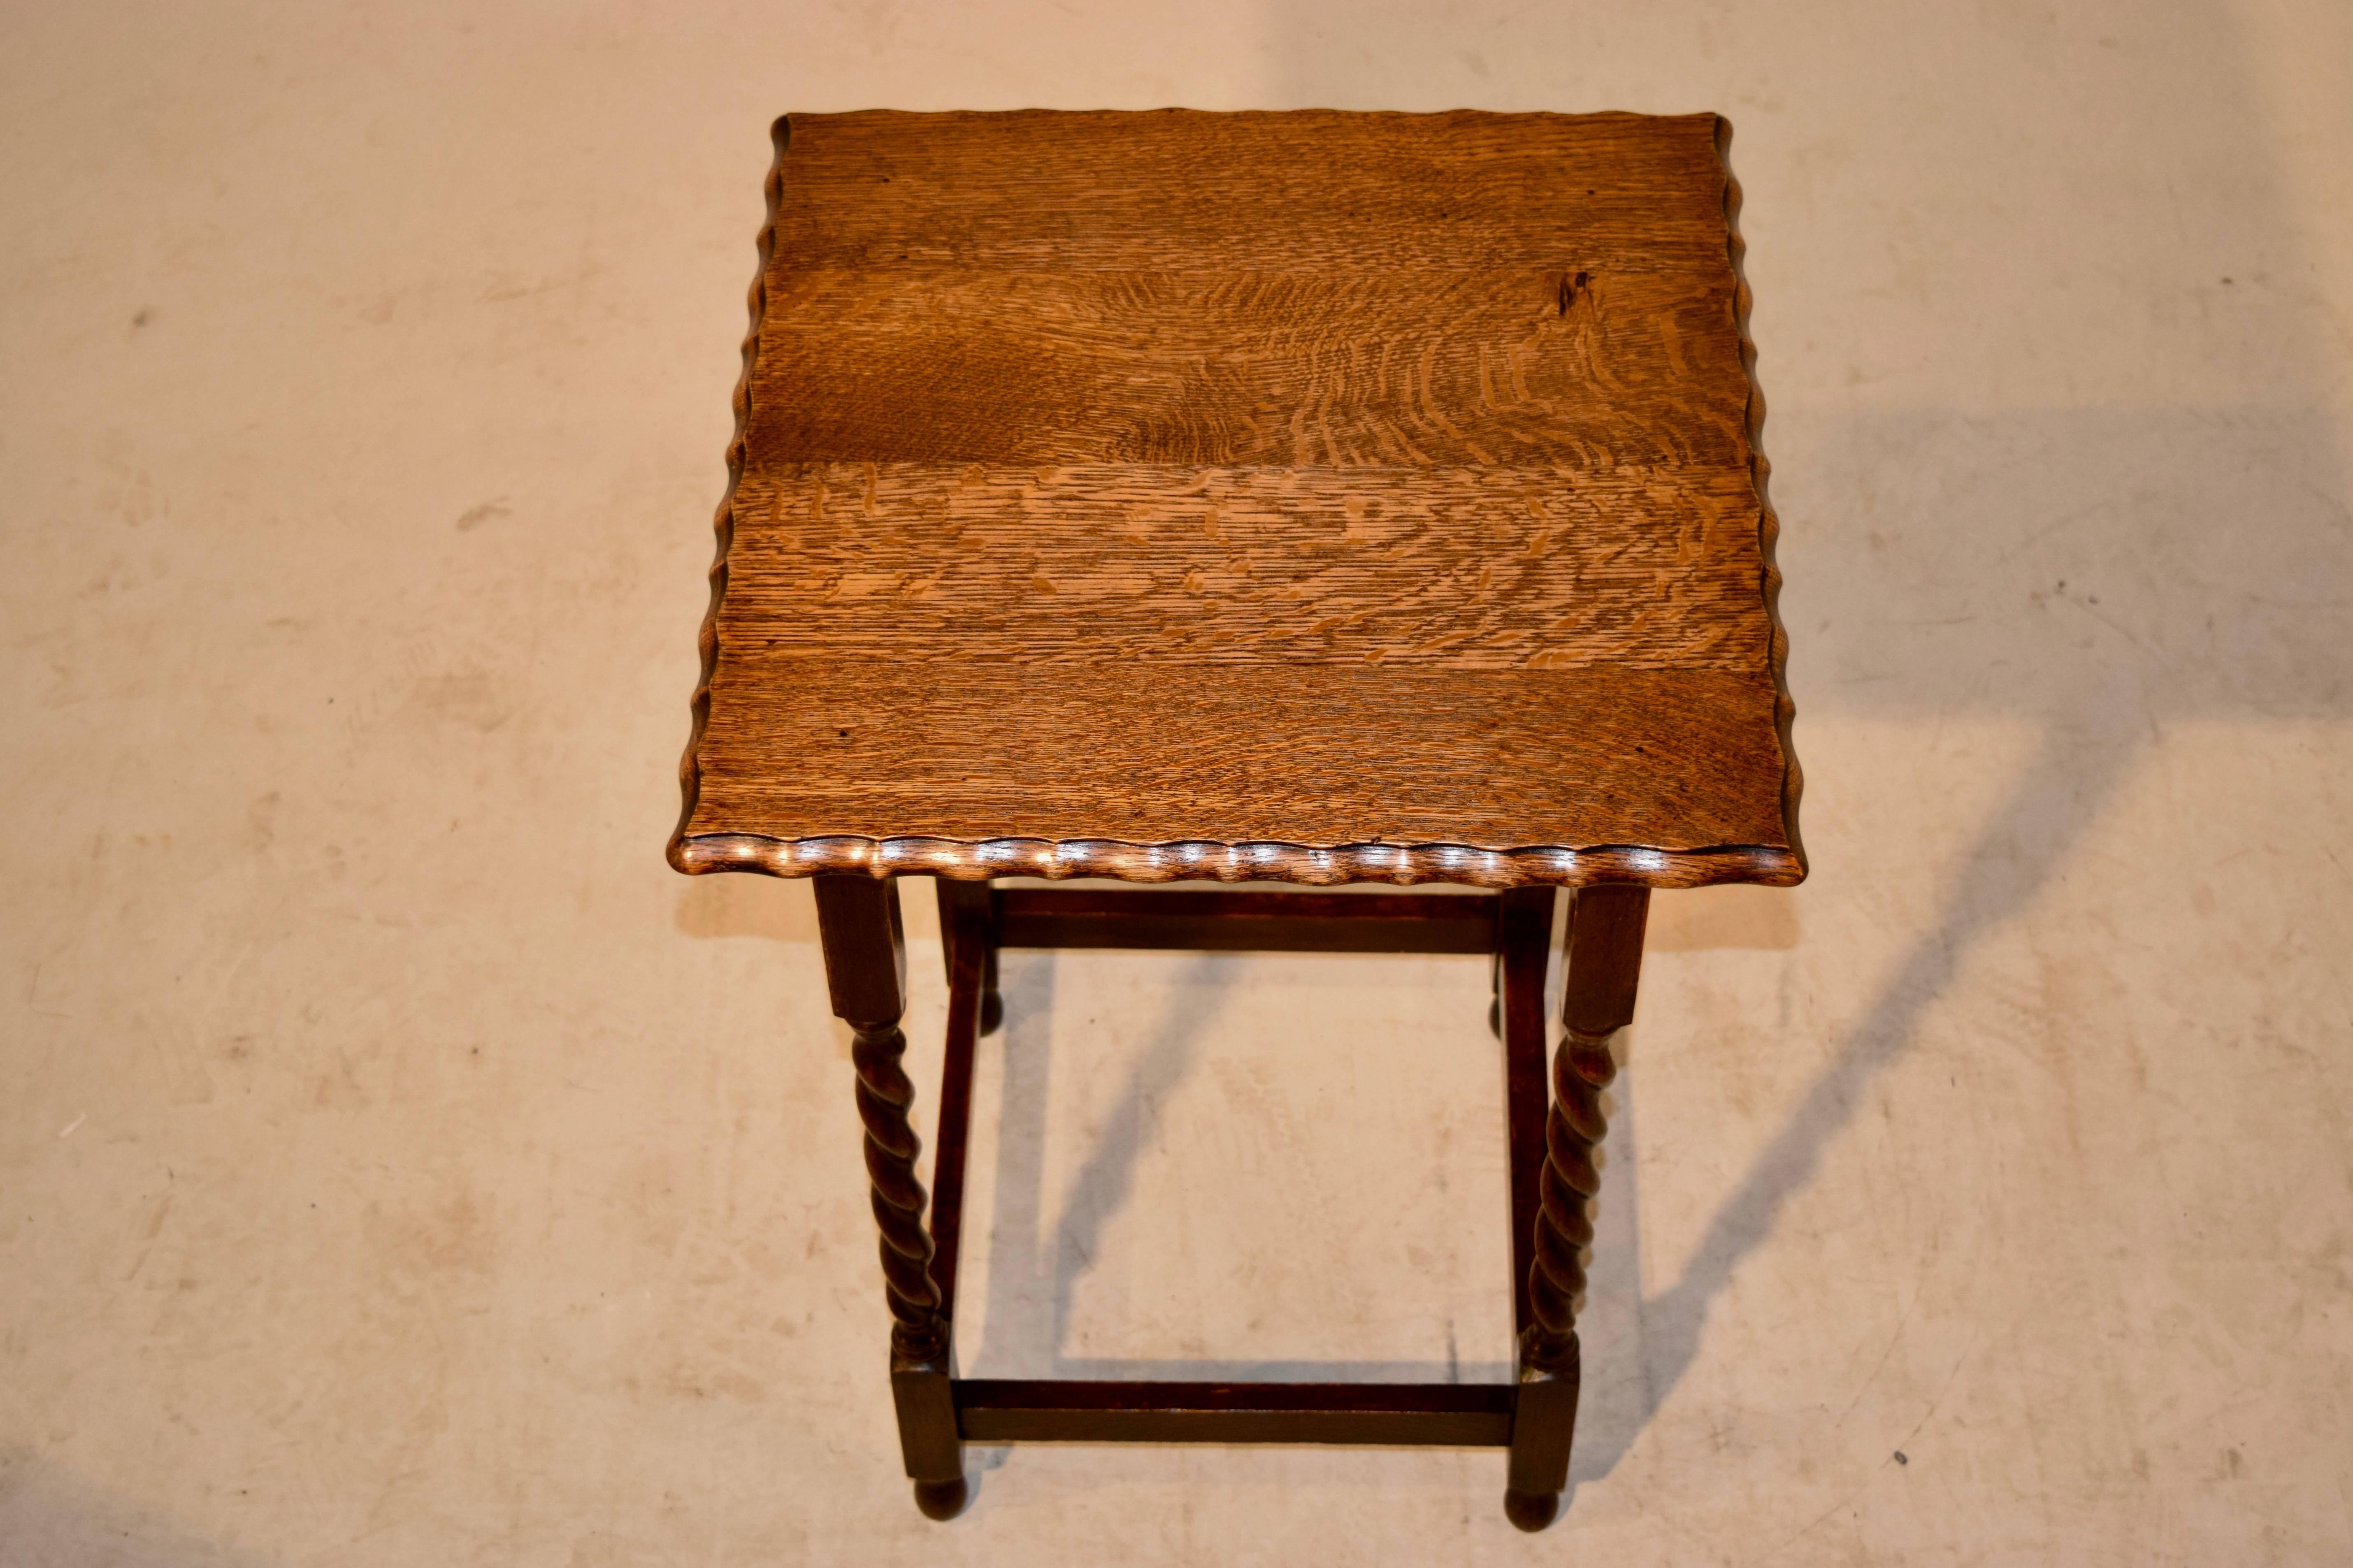 Edwardian English Oak Side Table with Scalloped Top, circa 1900